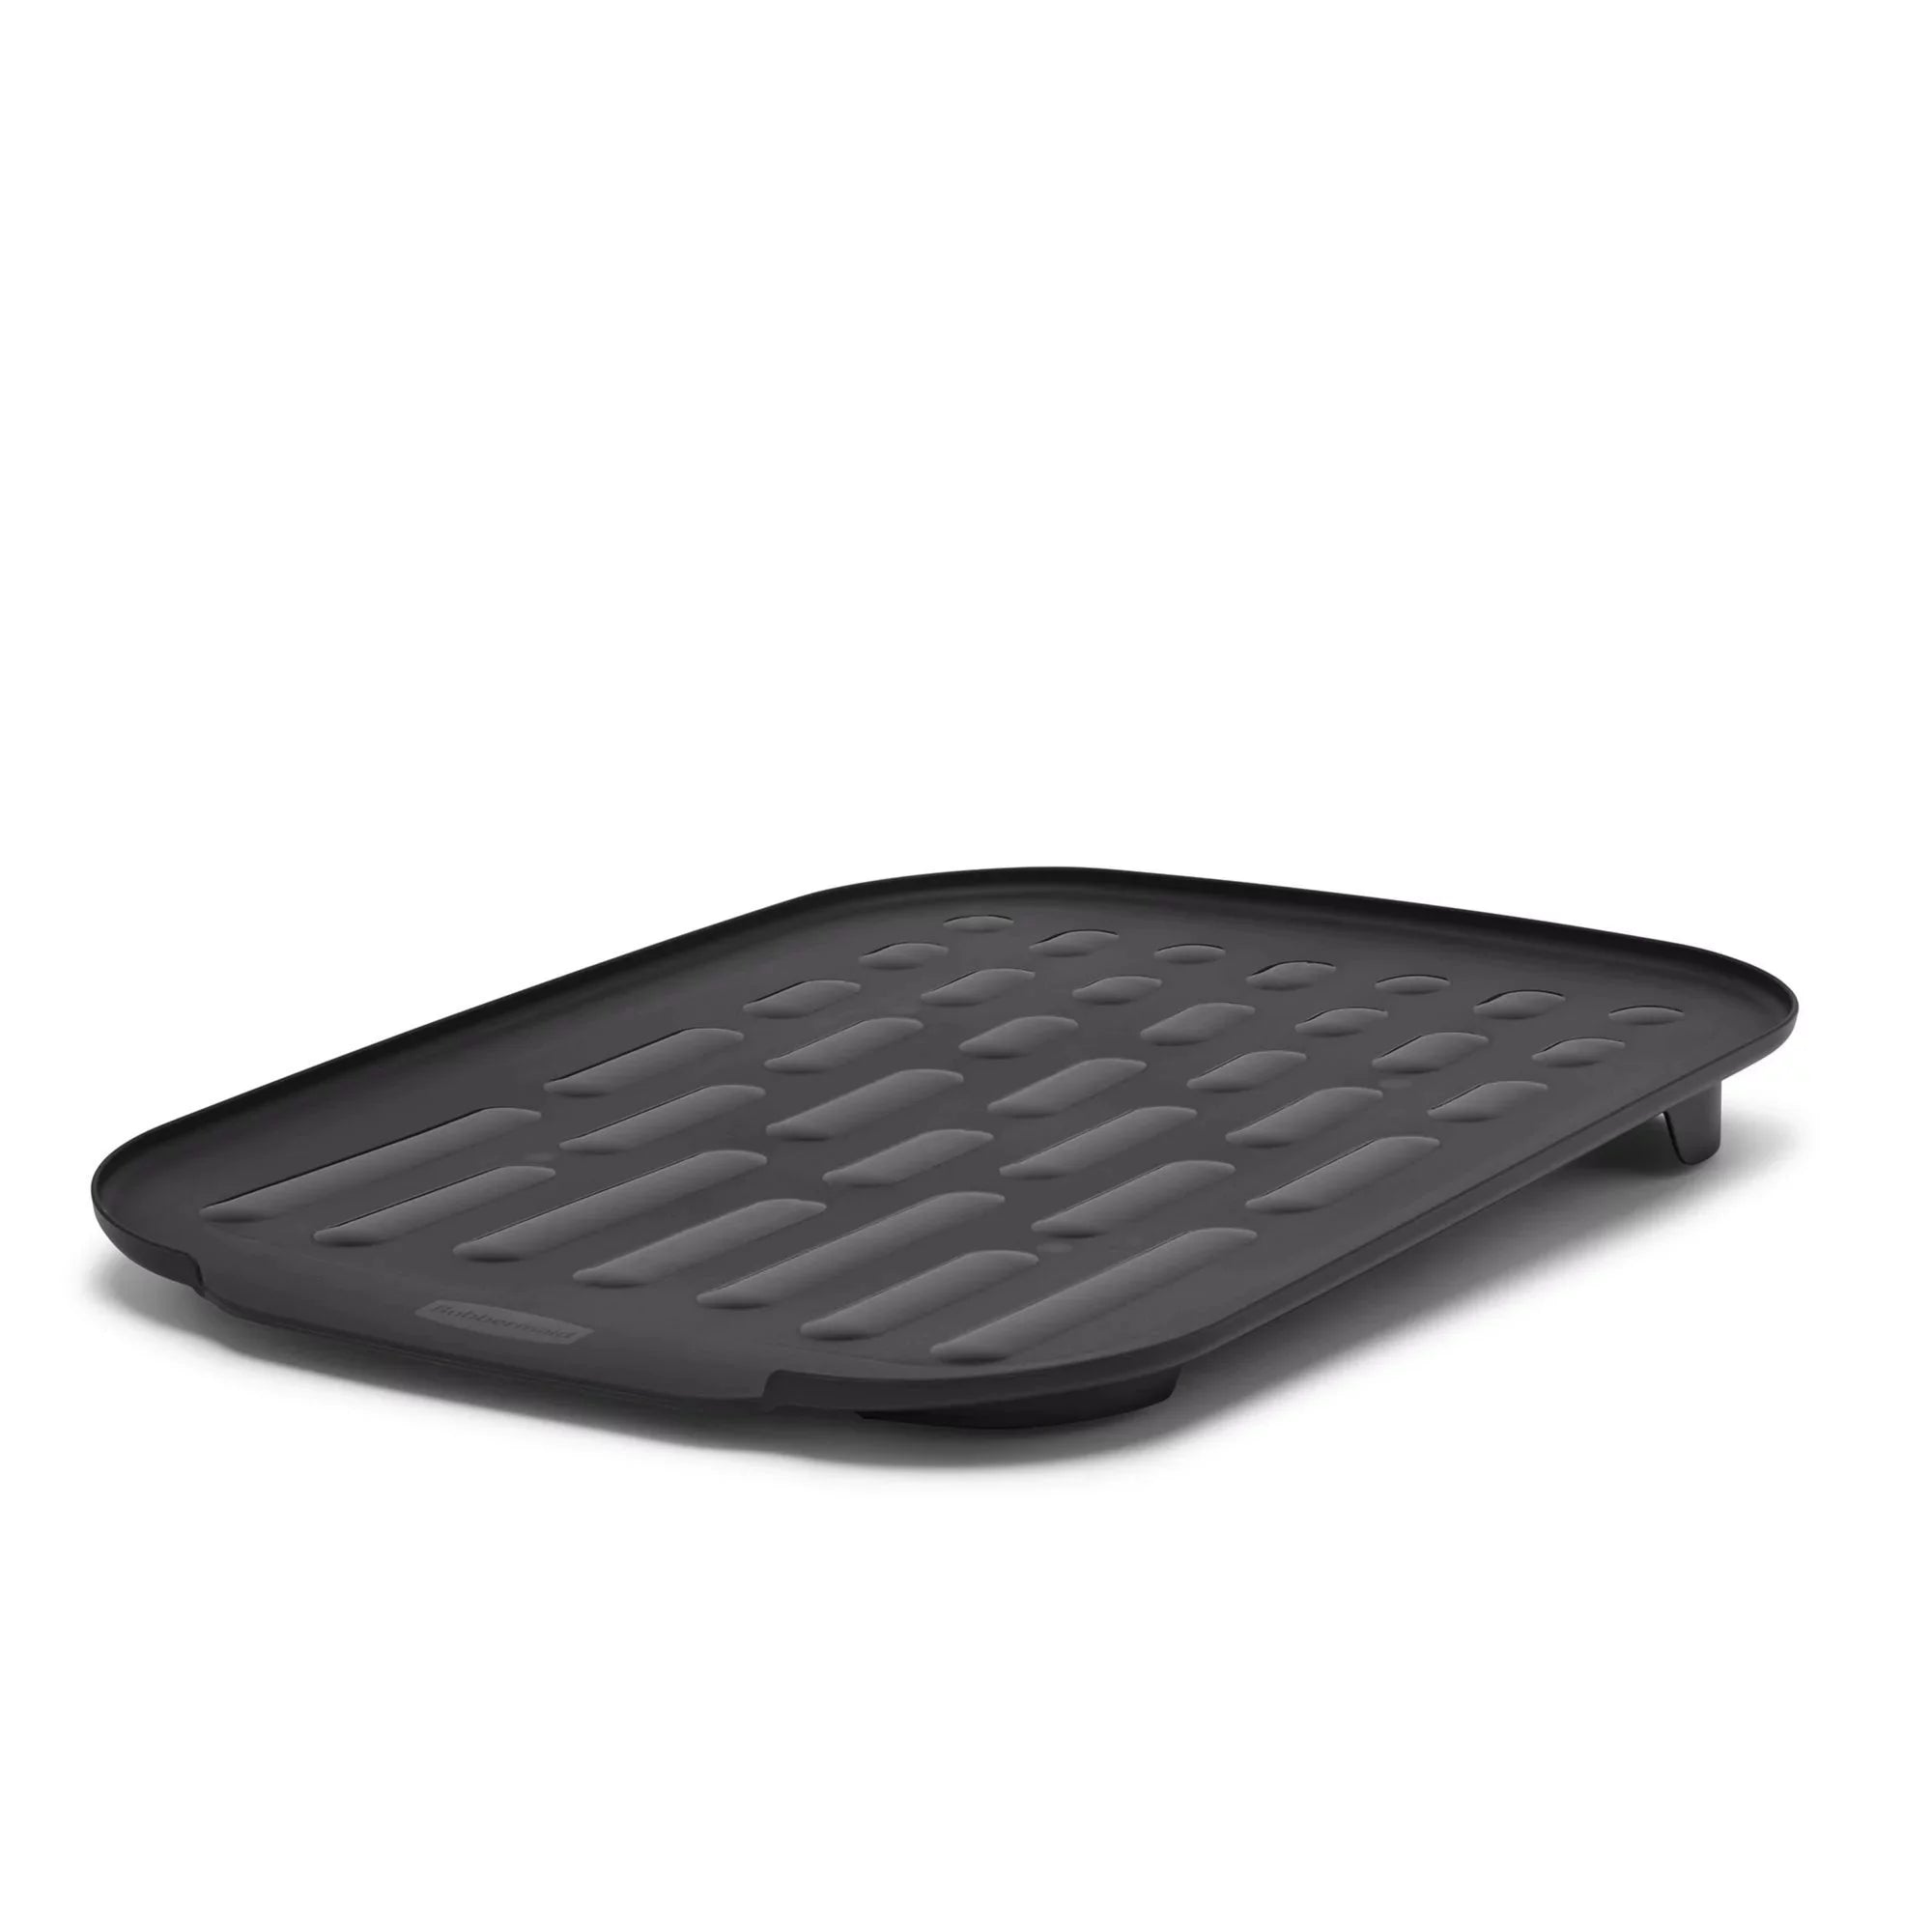 Wholesale prices with free shipping all over United States Rubbermaid Antimicrobial Dish Drain Board, Drying Mat, Large, Raven Grey - Steven Deals